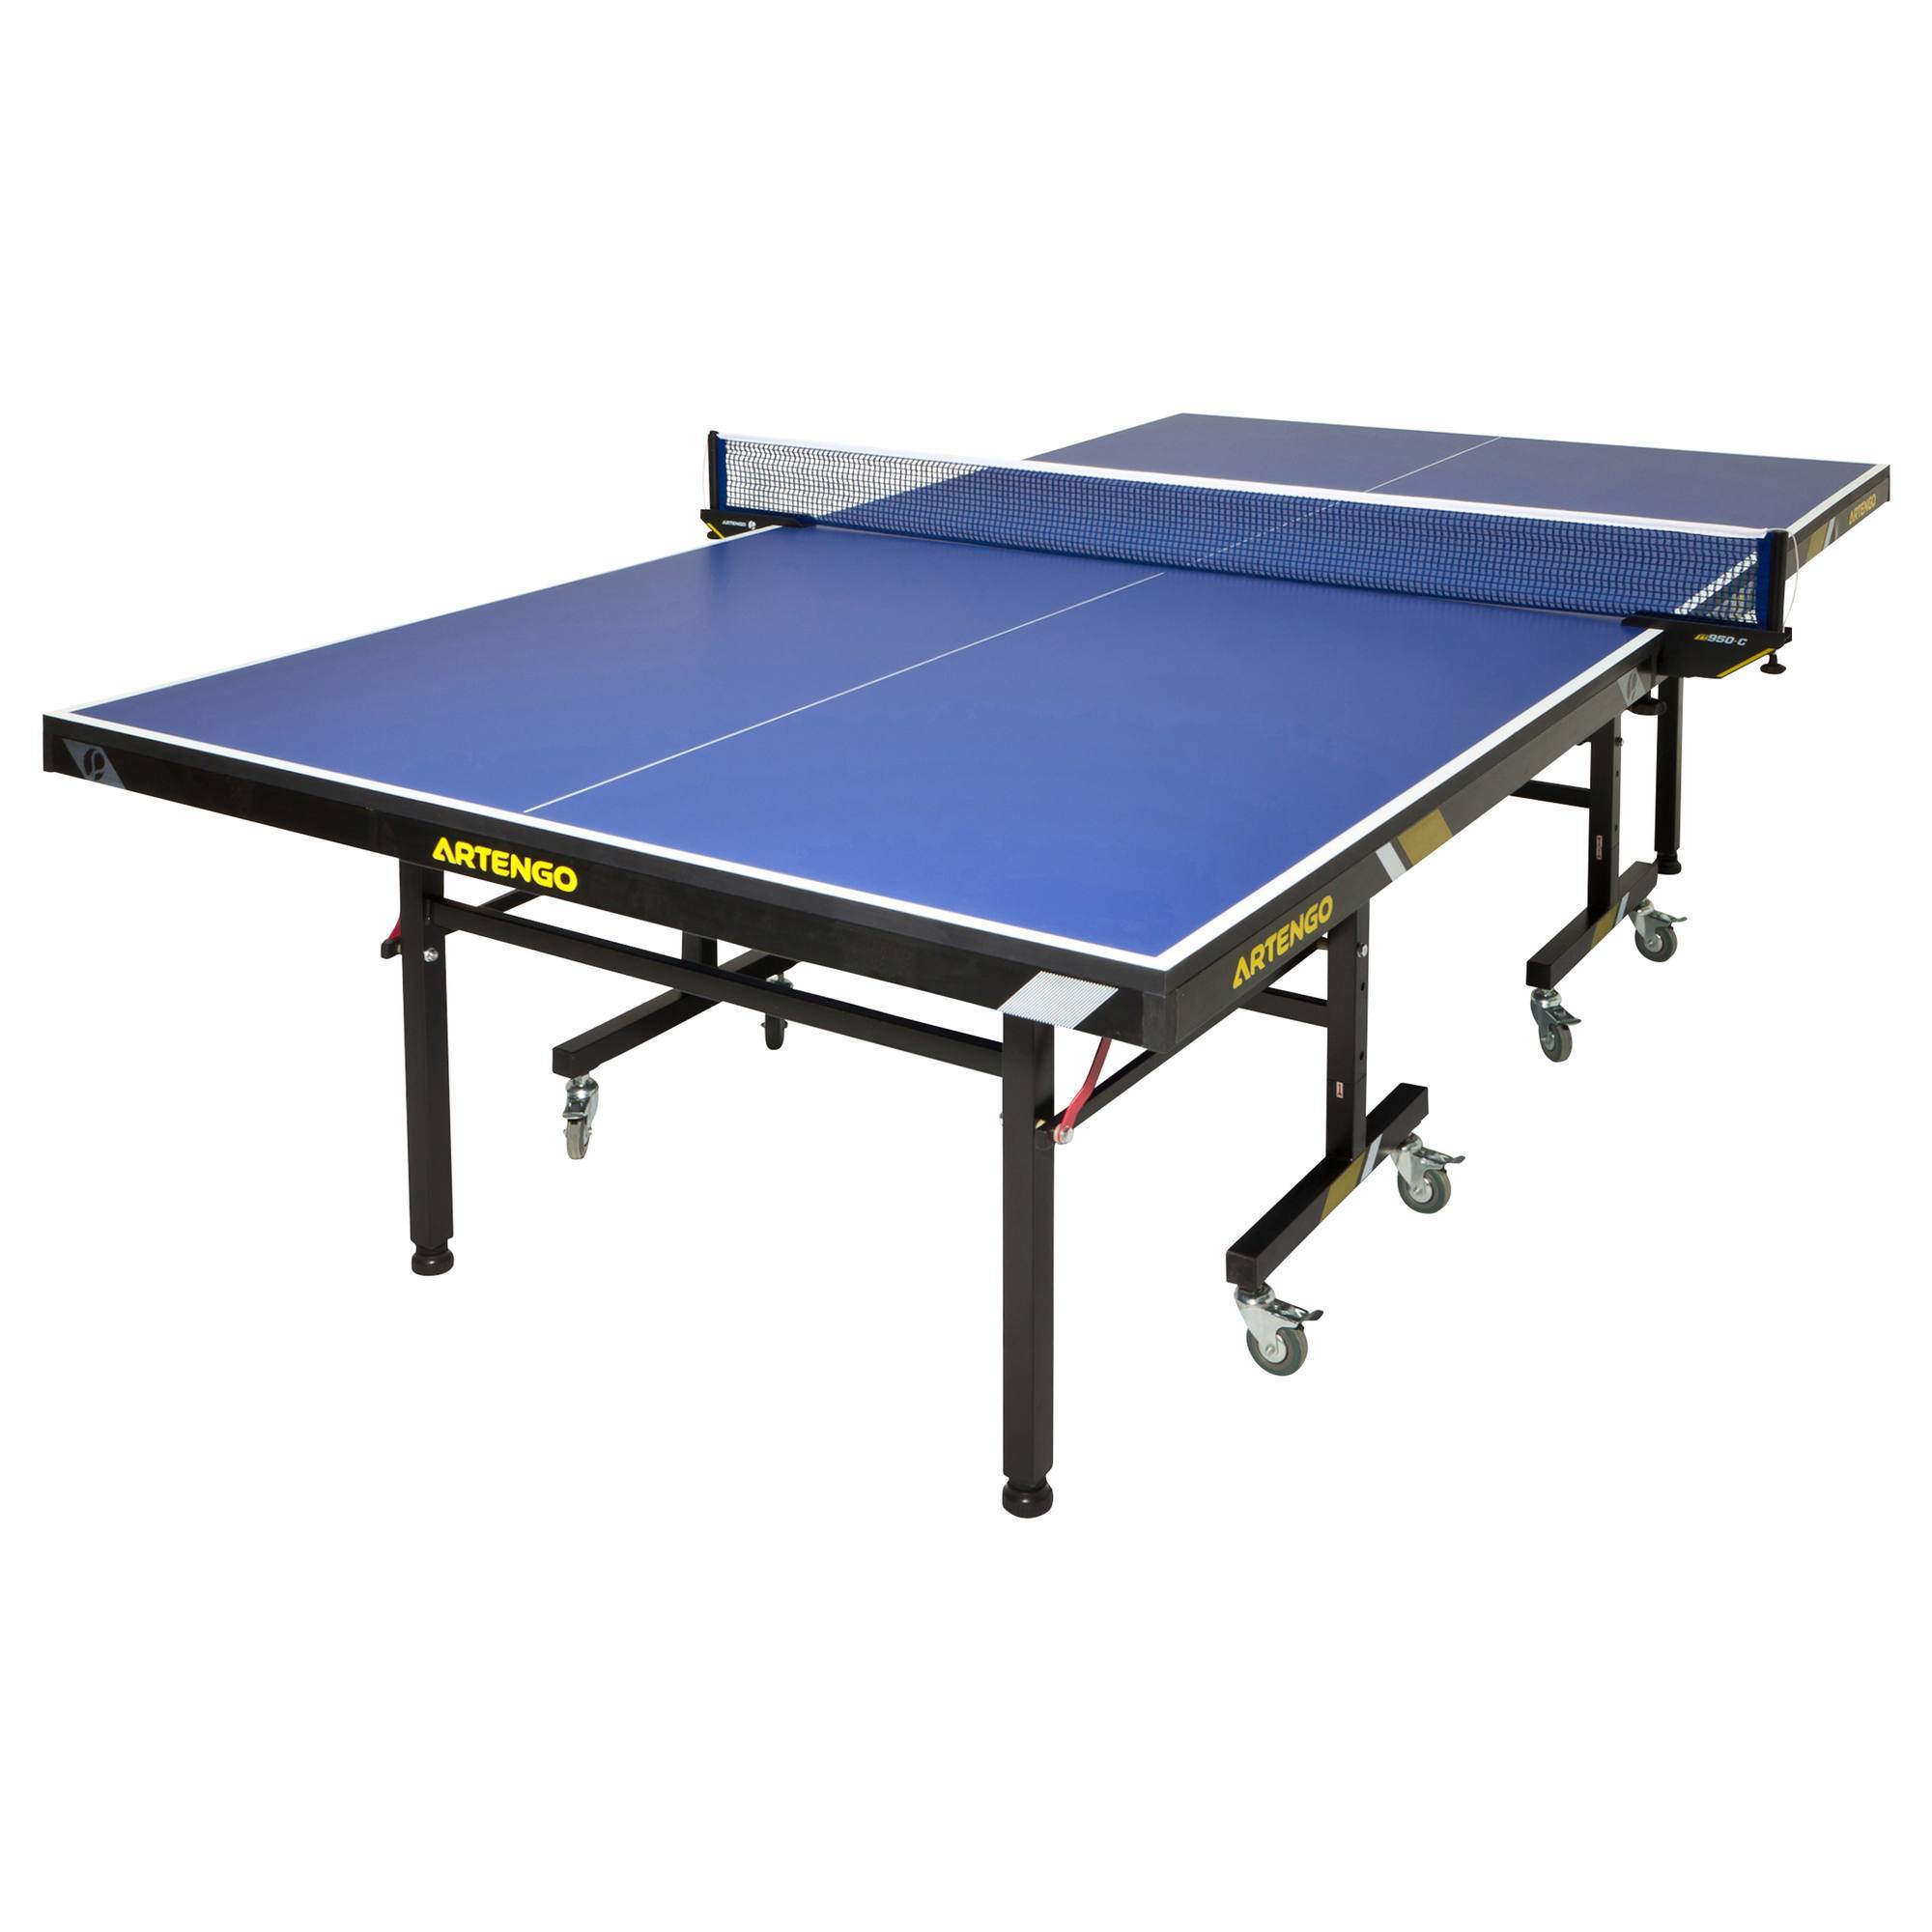 FT950 Club FFTT Approved Table Tennis Table - Blue | artengo